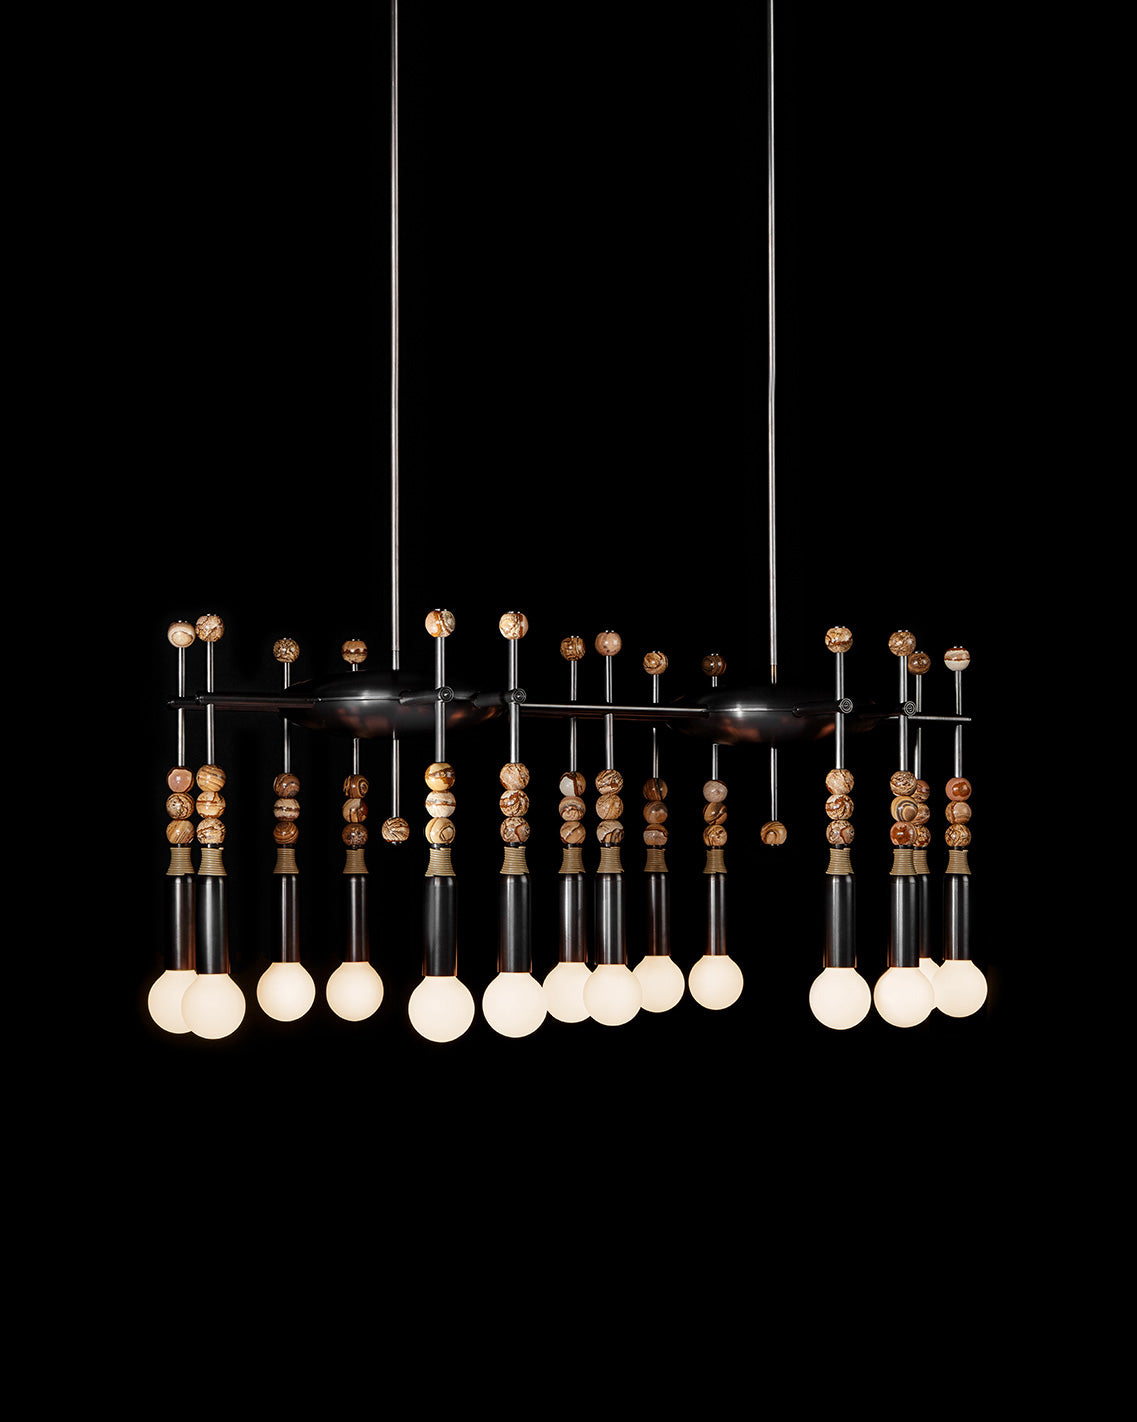 TALISMAN : 14 chandelier in Oil-Rubbed Bronze and Tan Leather with Desert Jasper stone, hanging in front of a black background. 